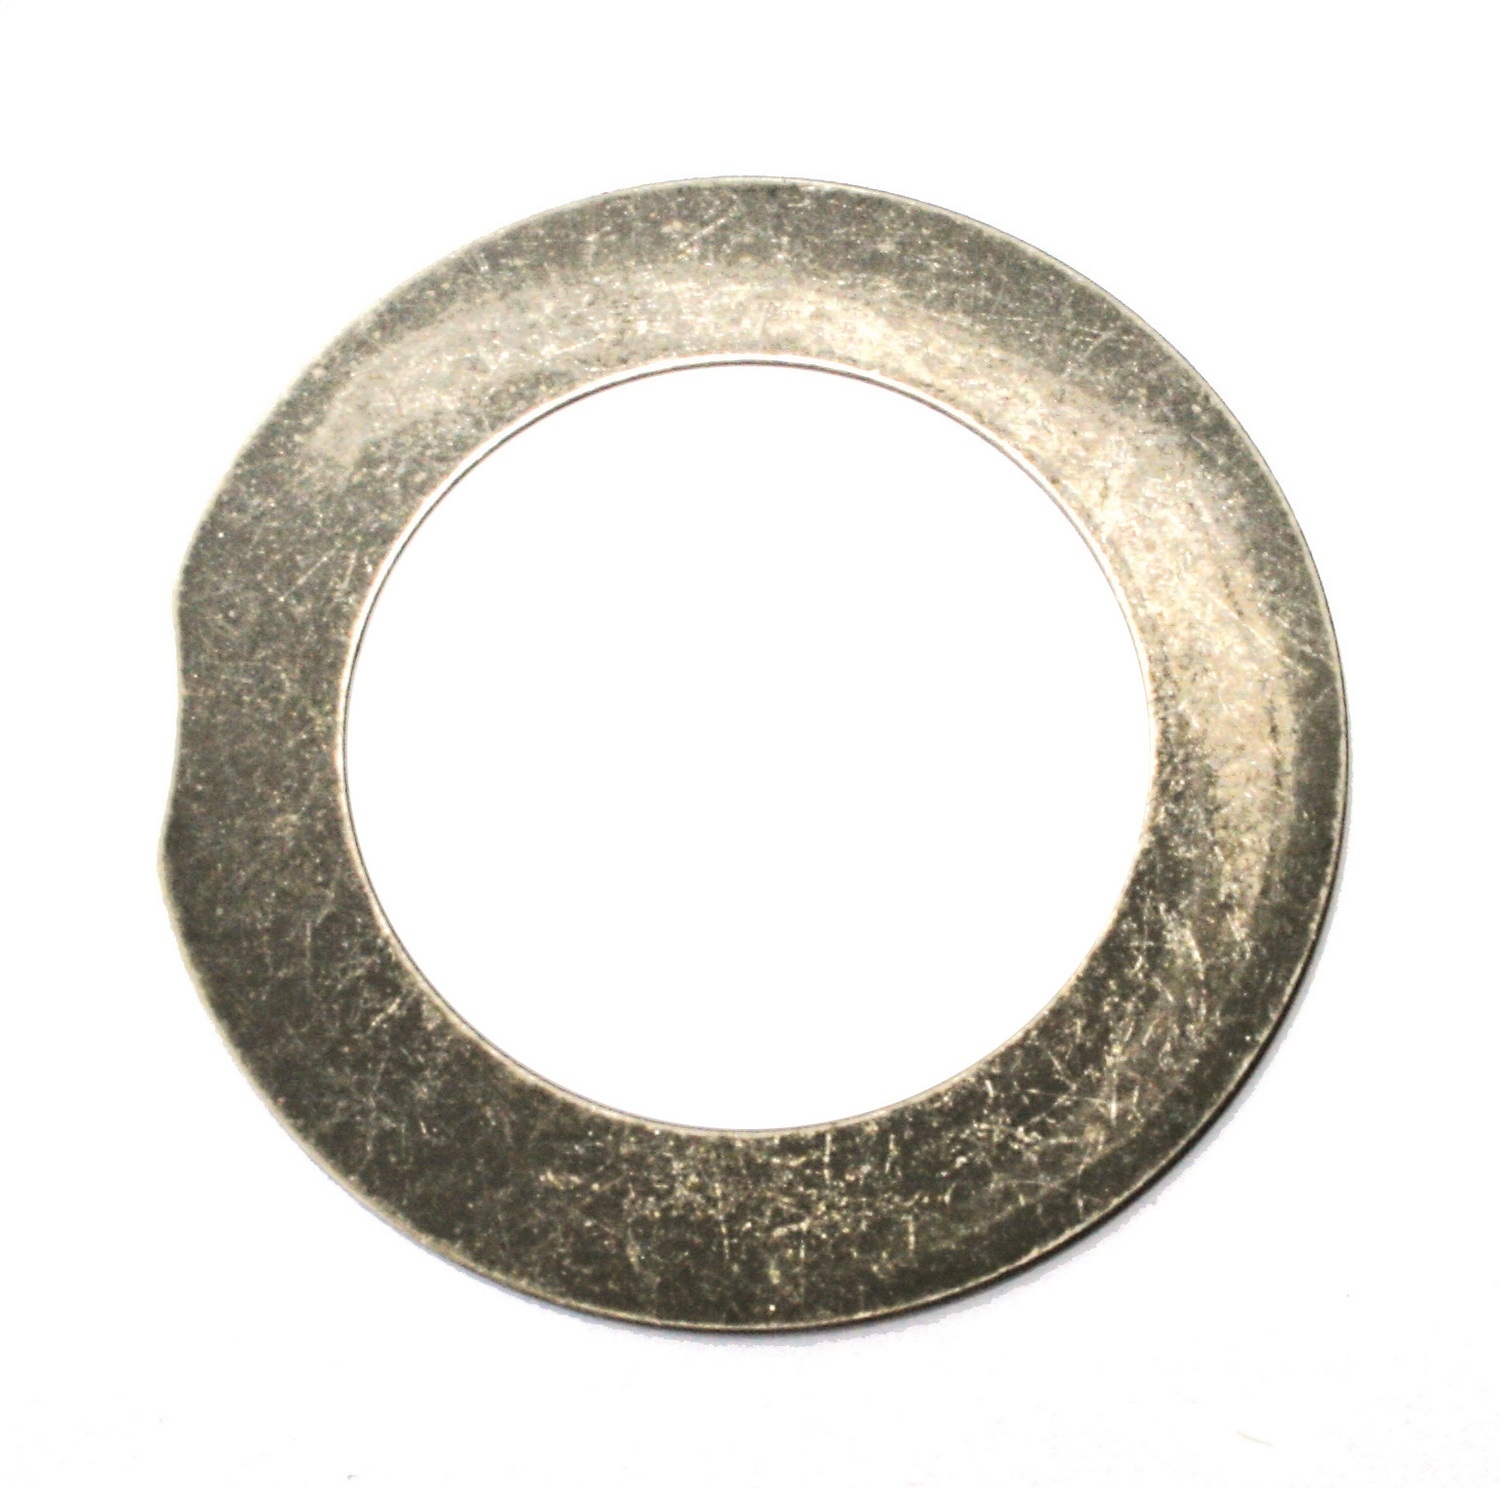 Omix This Differential Gear Thrust Washer From Omix Fits 99-03 Jeep Grand Cherokee And 99-06